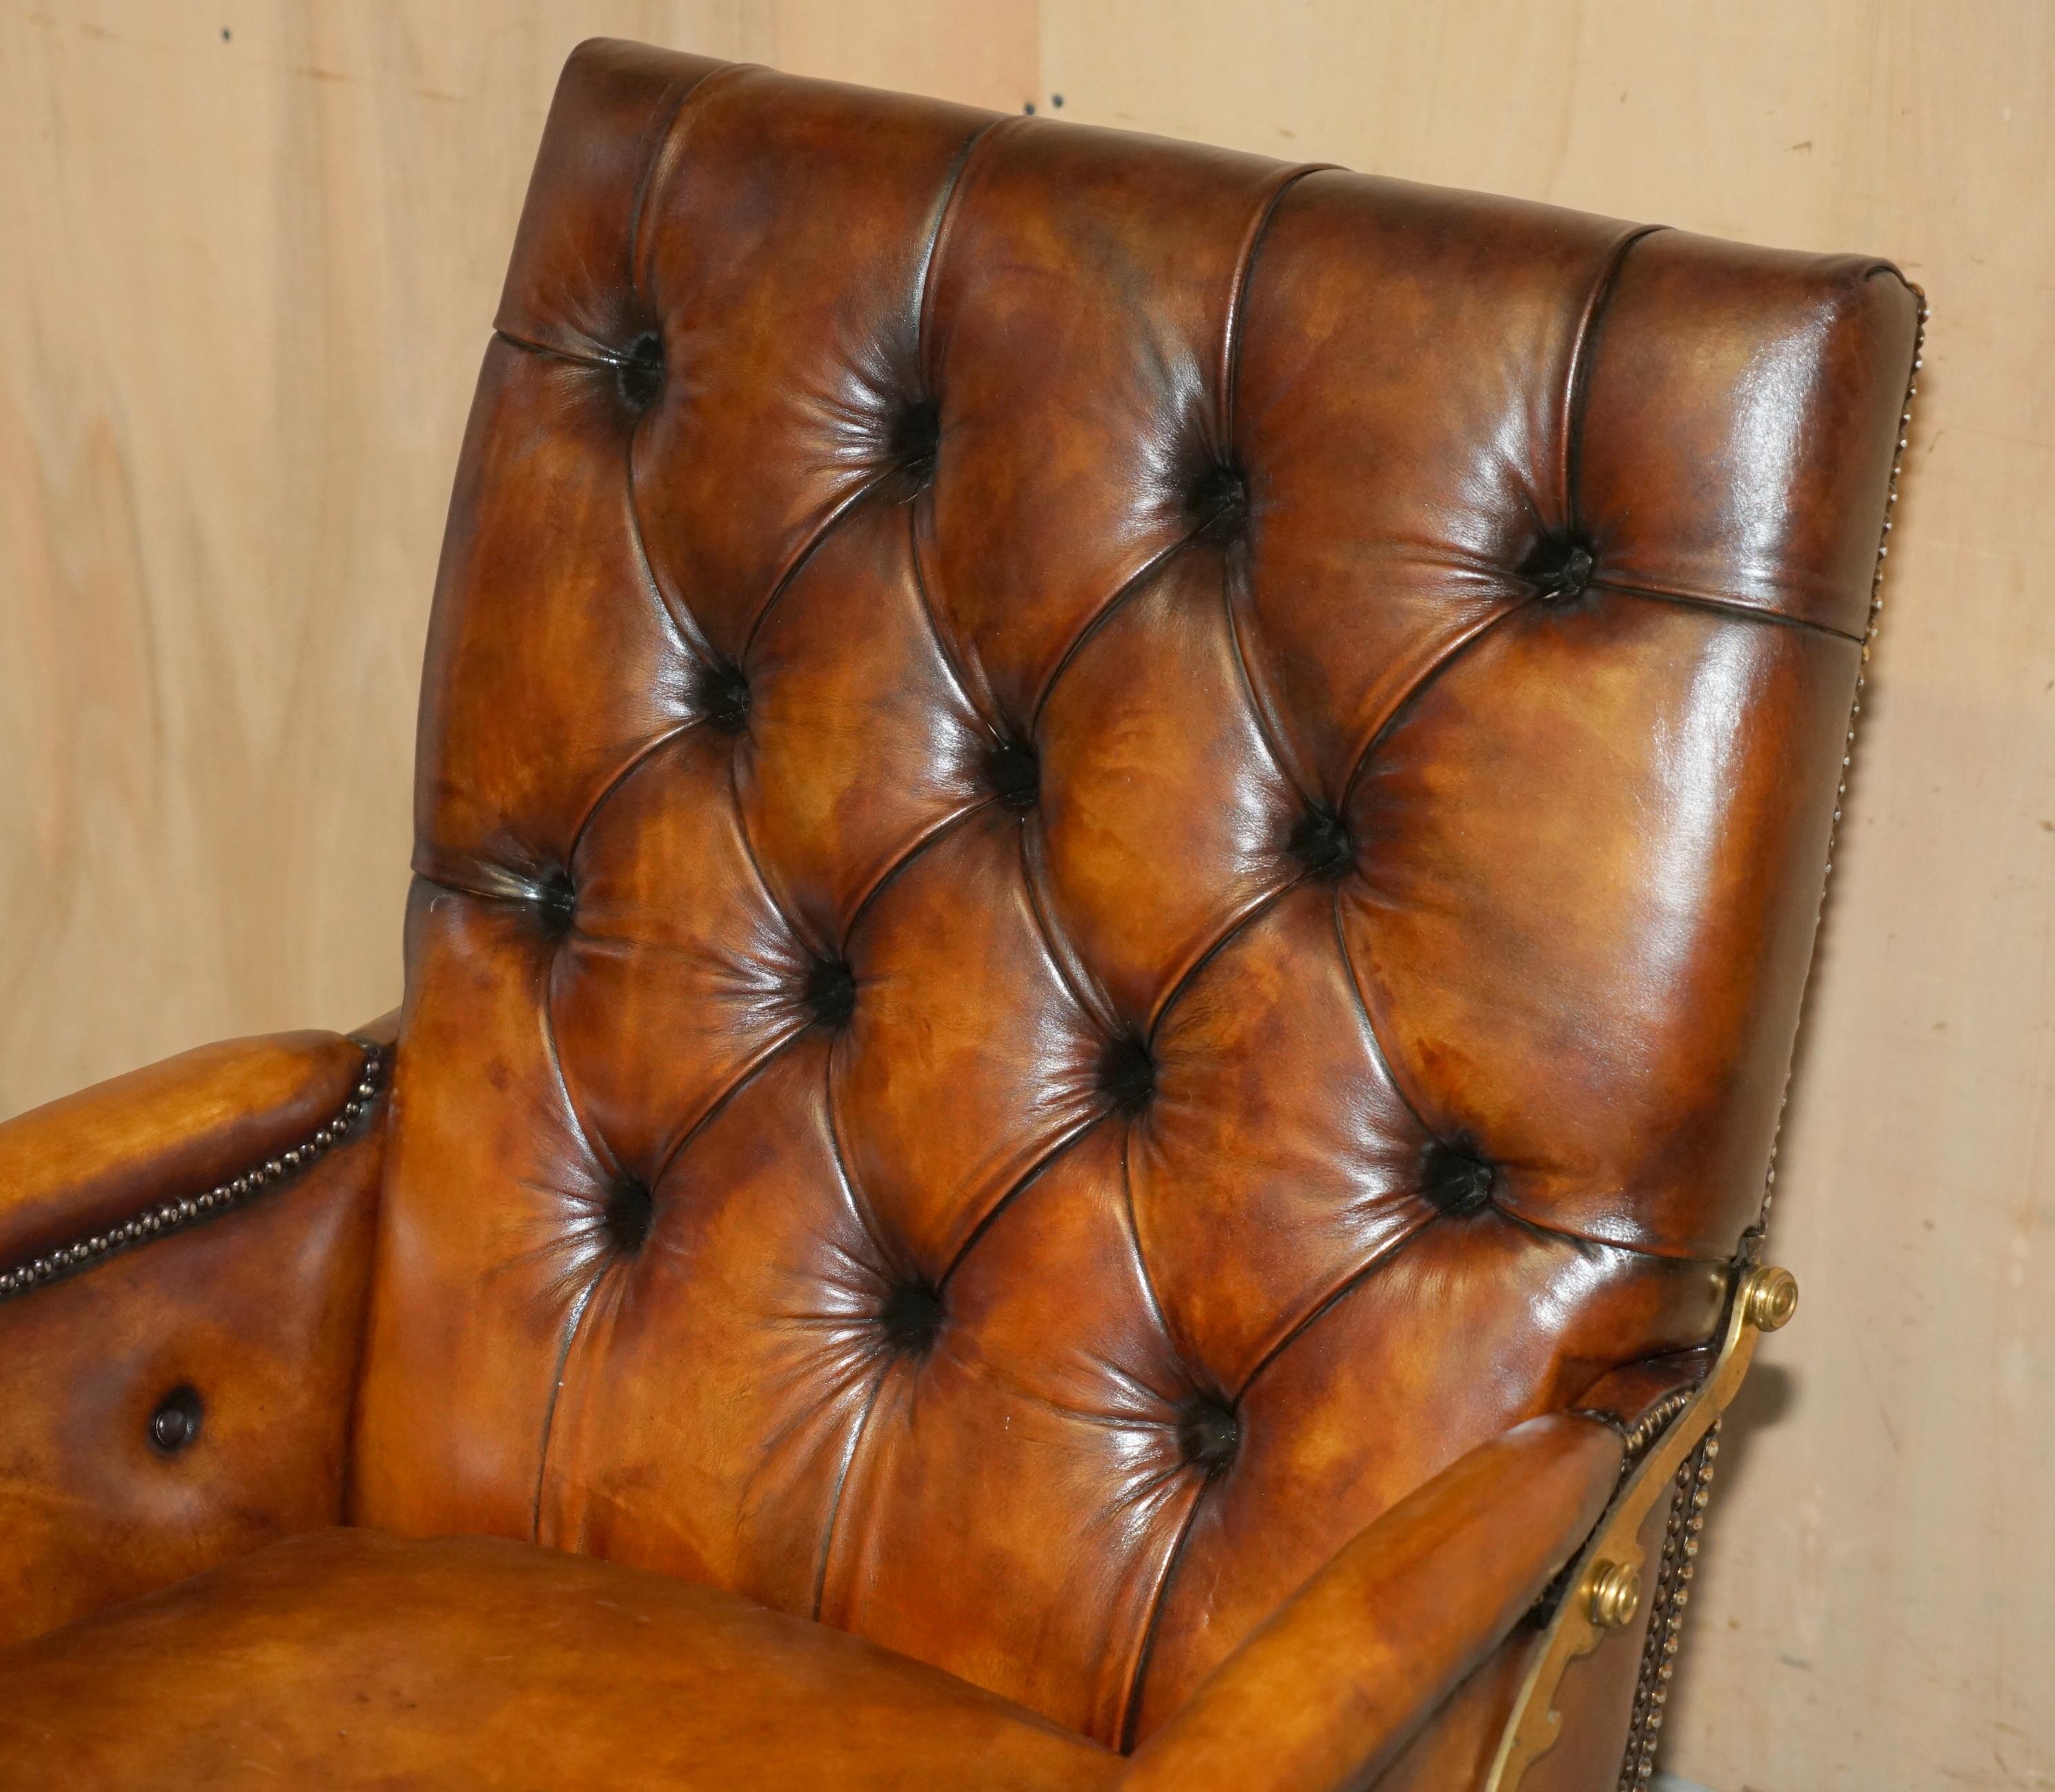 RESTORED CHESTERFIELD TUFTED HAND DYED BROWN LEATHER LIBRARY RECLINER ARMCHAiR (Englisch) im Angebot